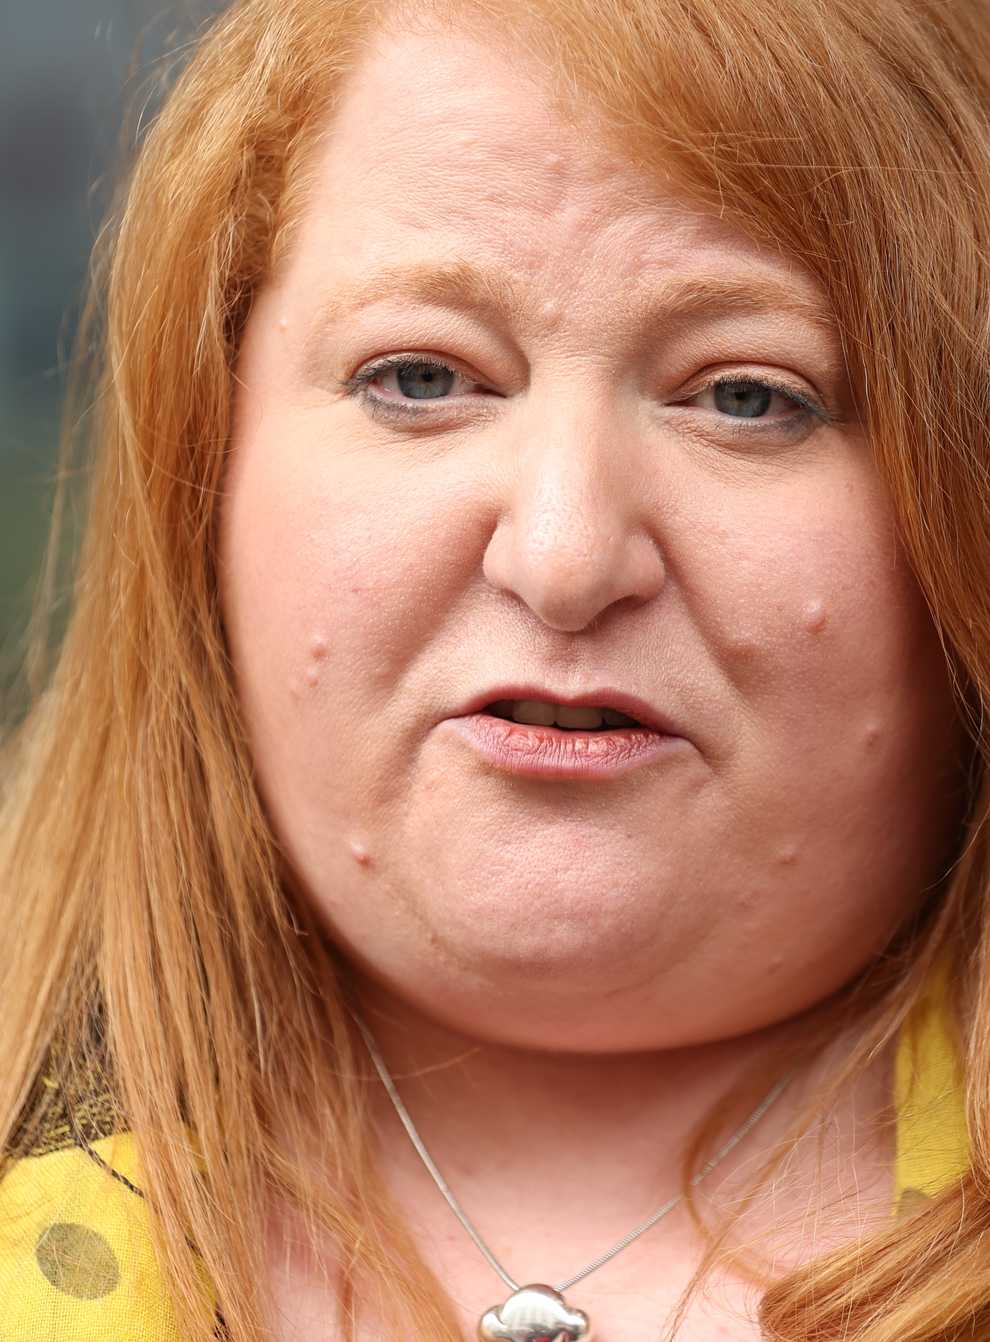 Naomi Long was speaking ahead of an announcement by the Public Prosecution Service over whether prosecutions will be pursued (PA)